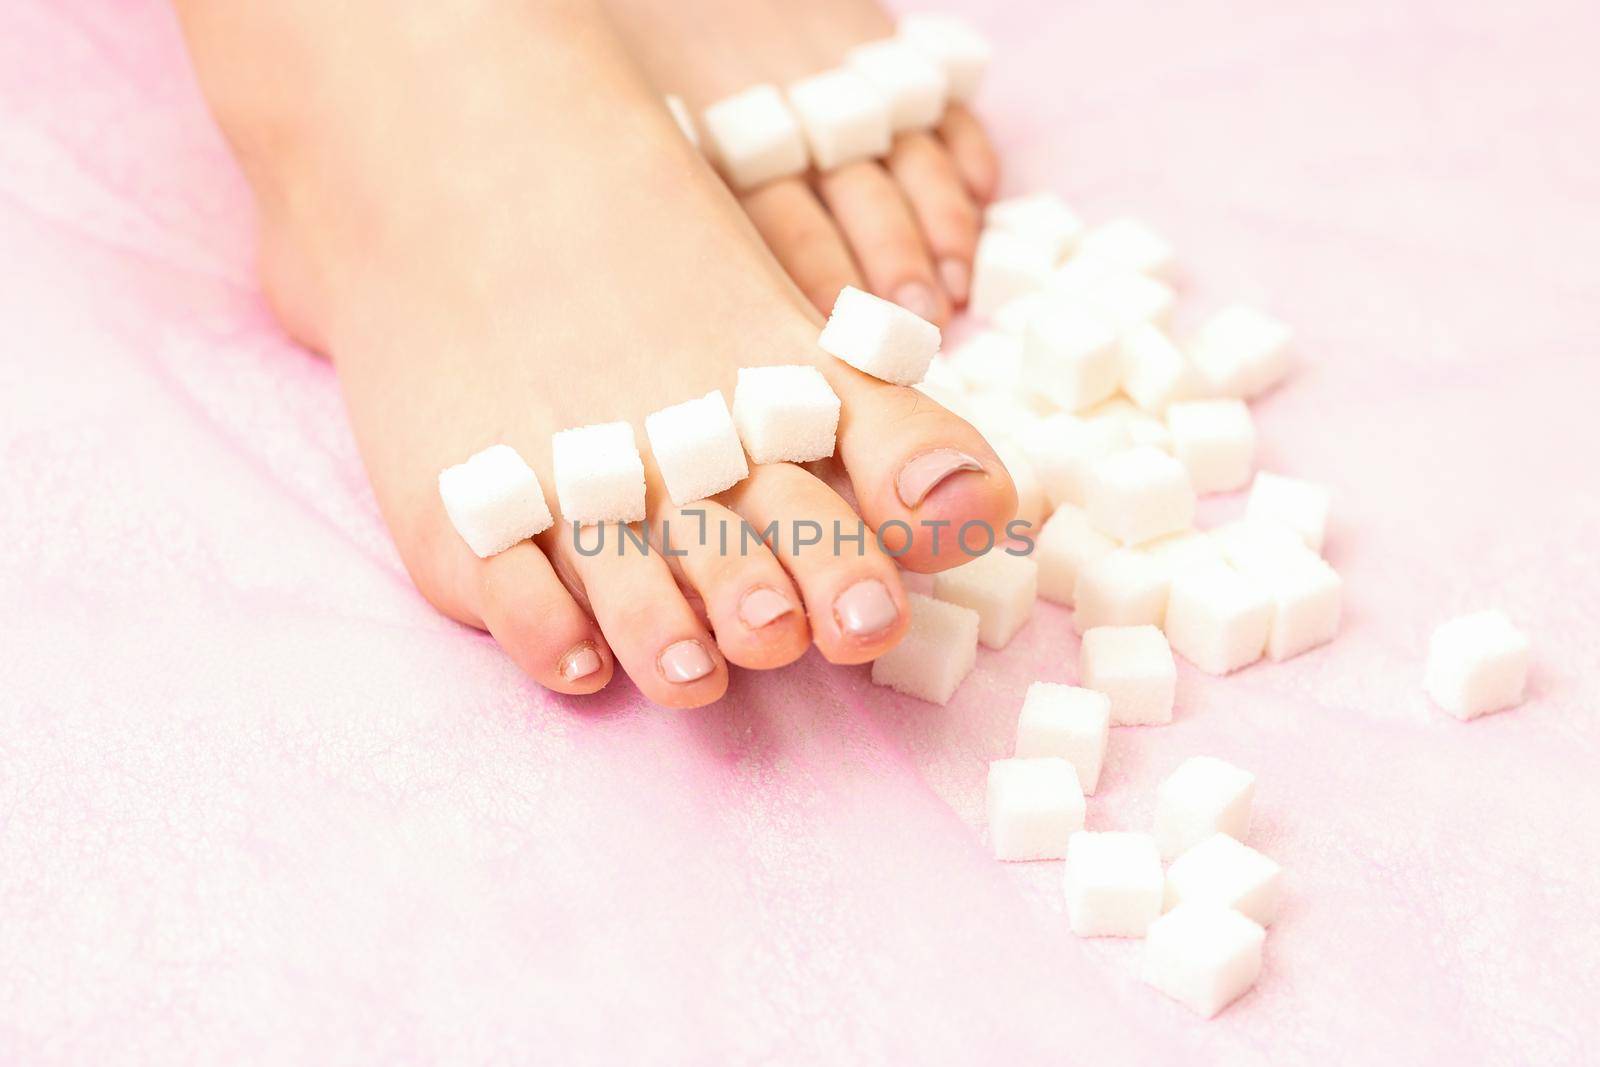 The concept of epilation, waxing. Sugar cubes lying down in a row on female feet, toes over pink background. by okskukuruza